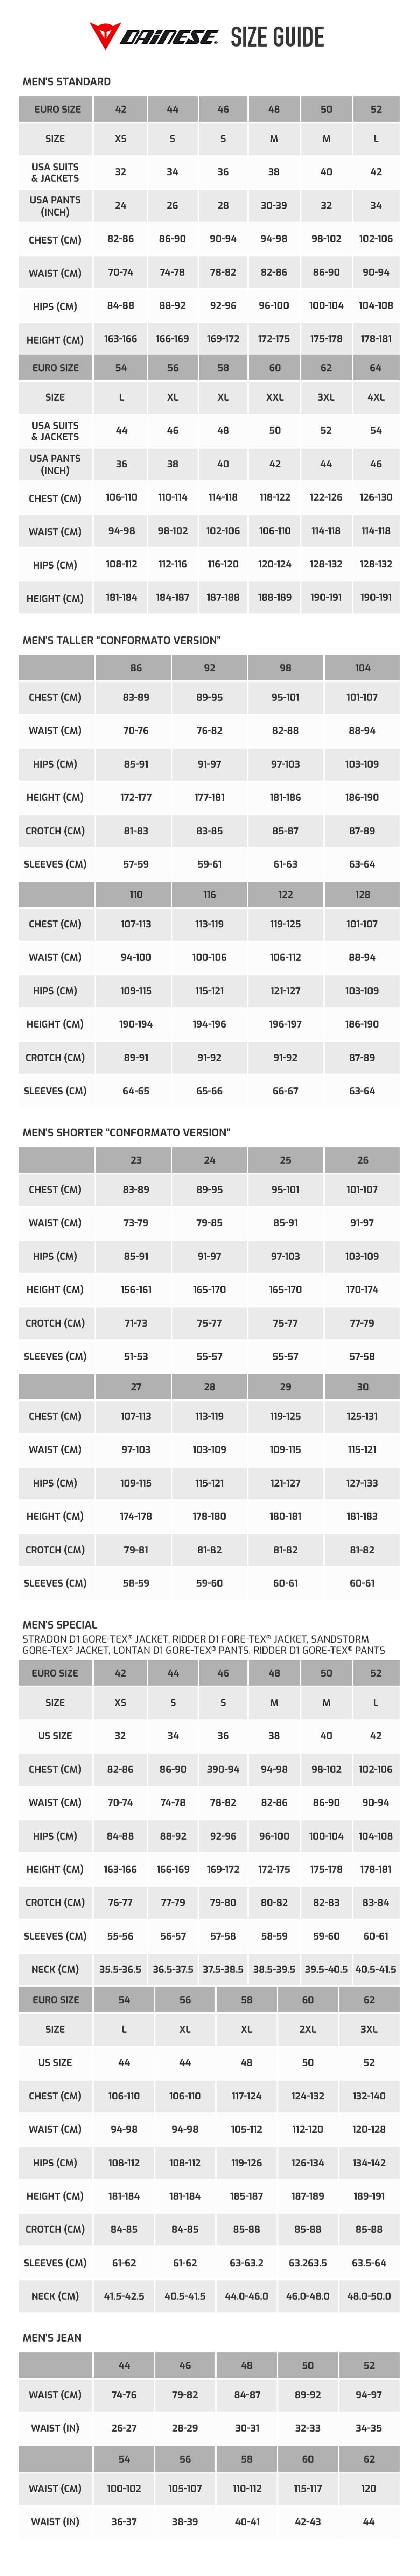 Dainese Size Chart Boots